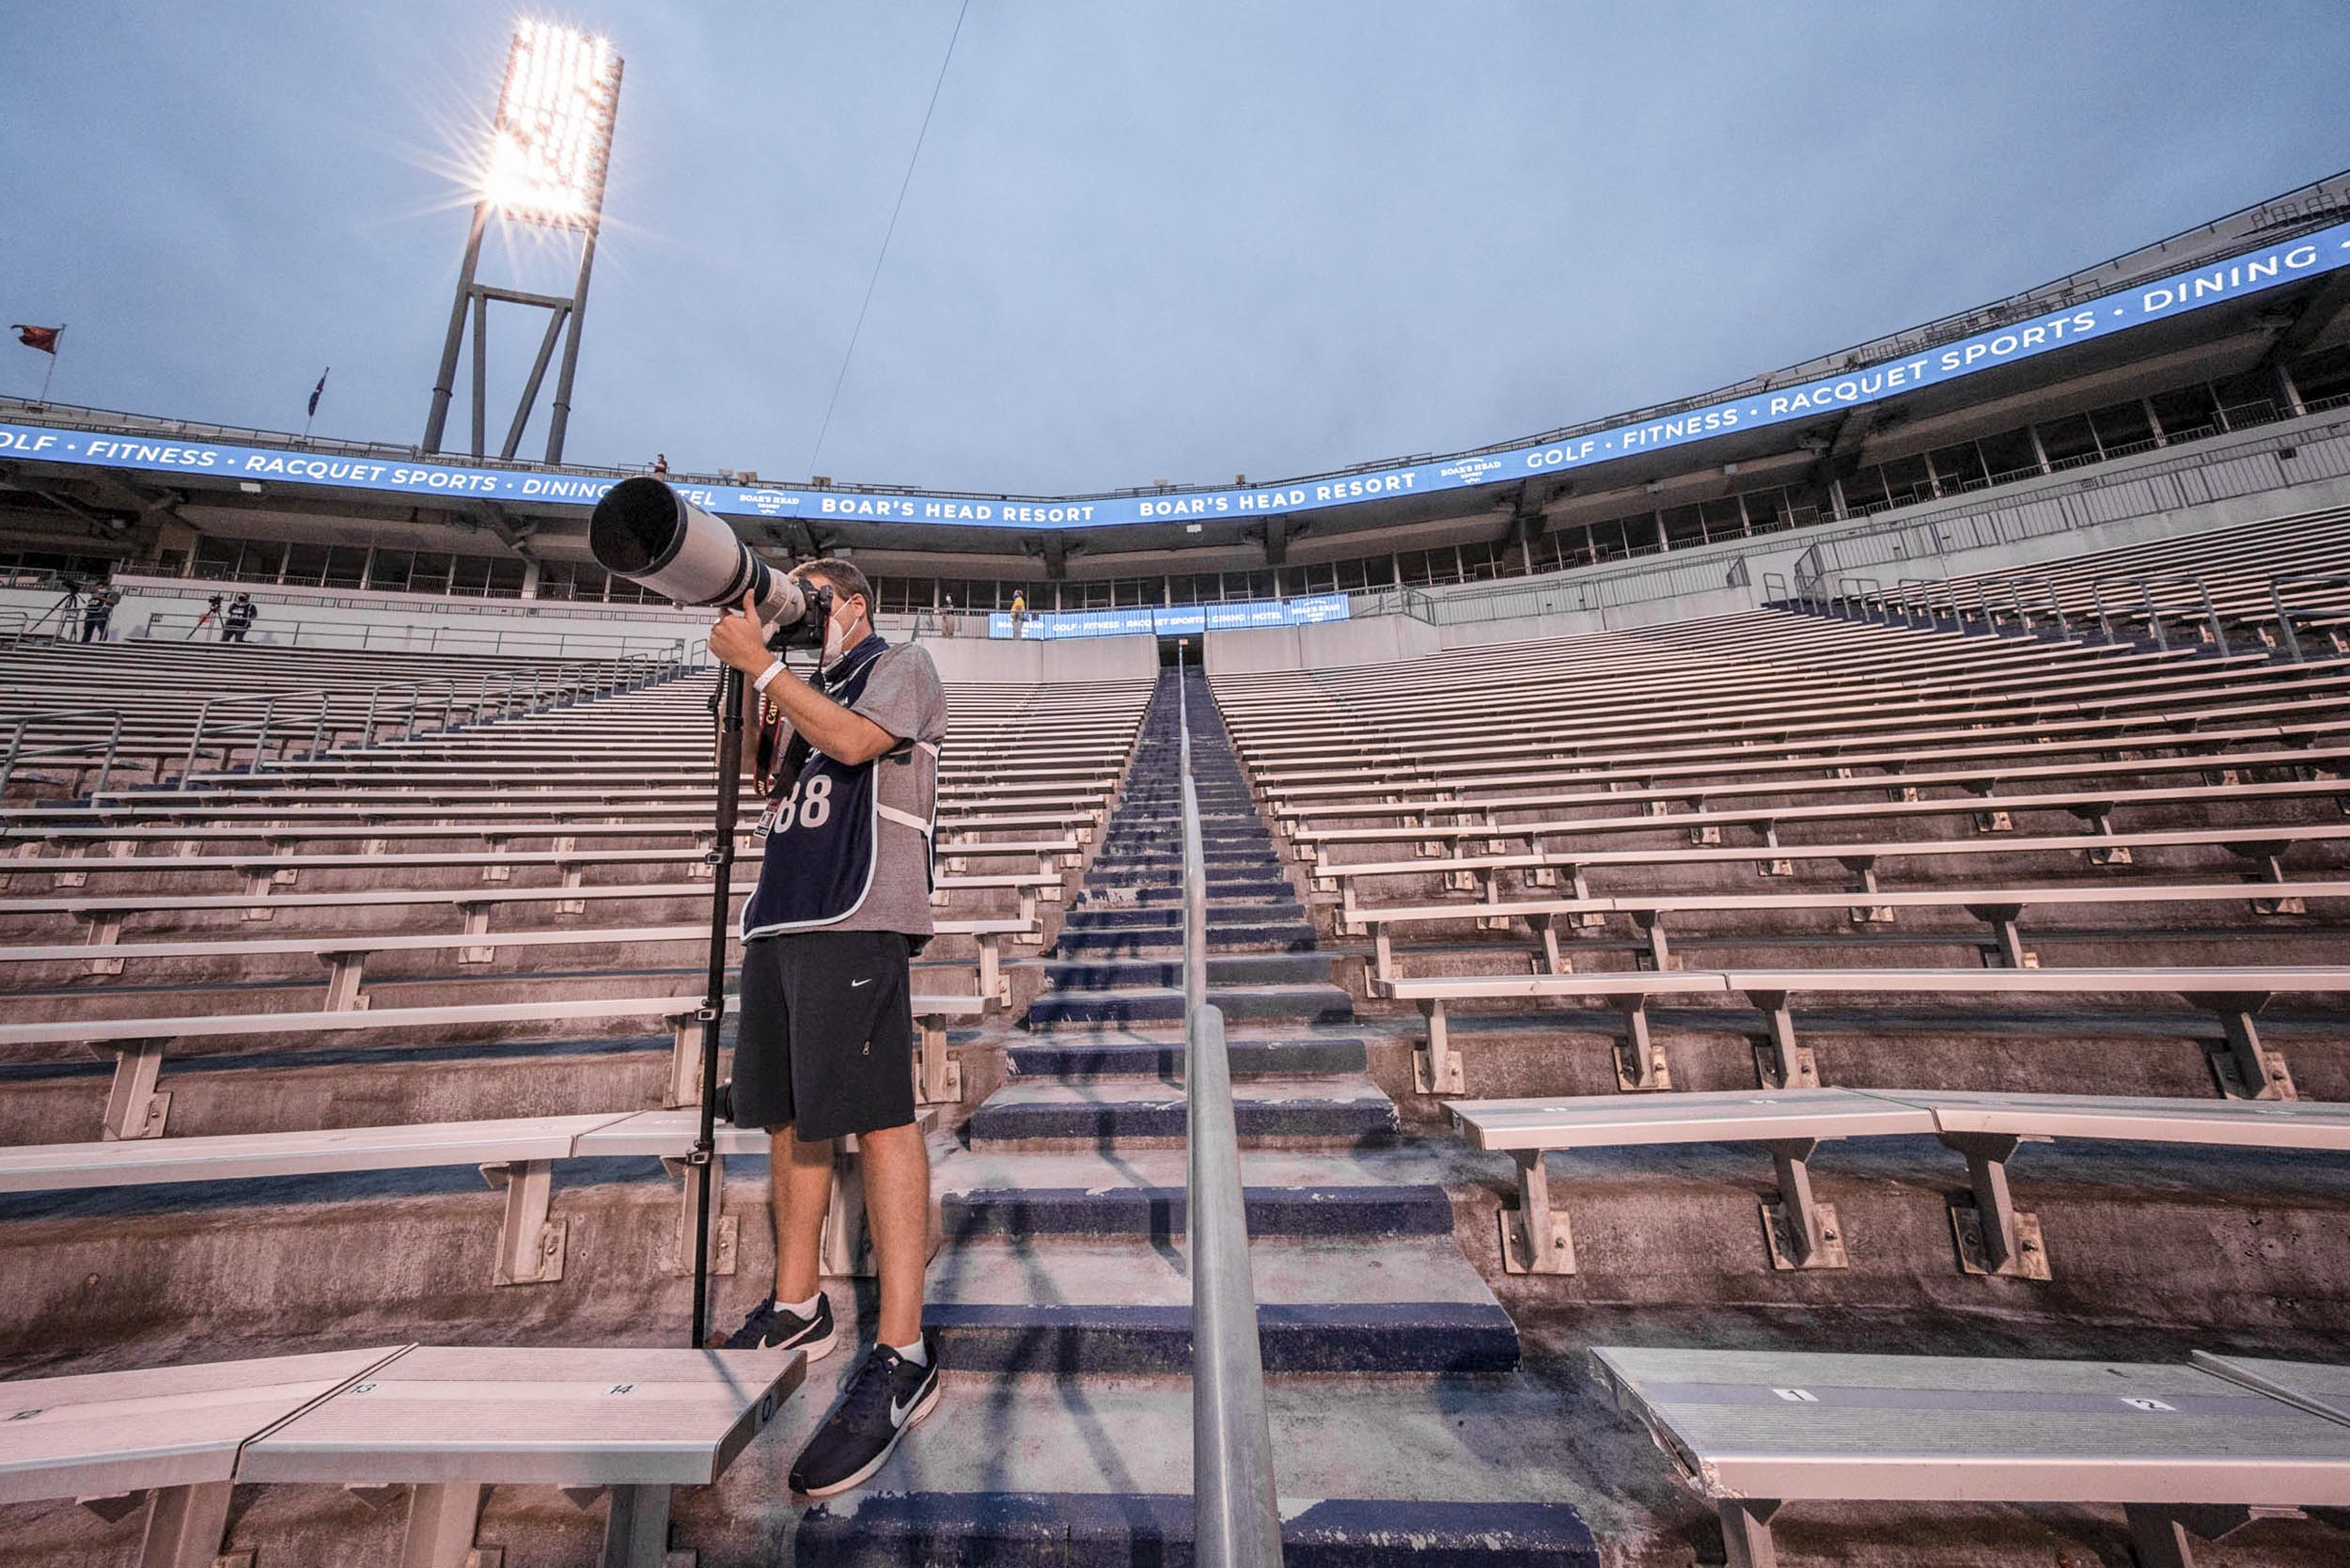 Matt Riley standing in the Scot stadium taking a photo of the field